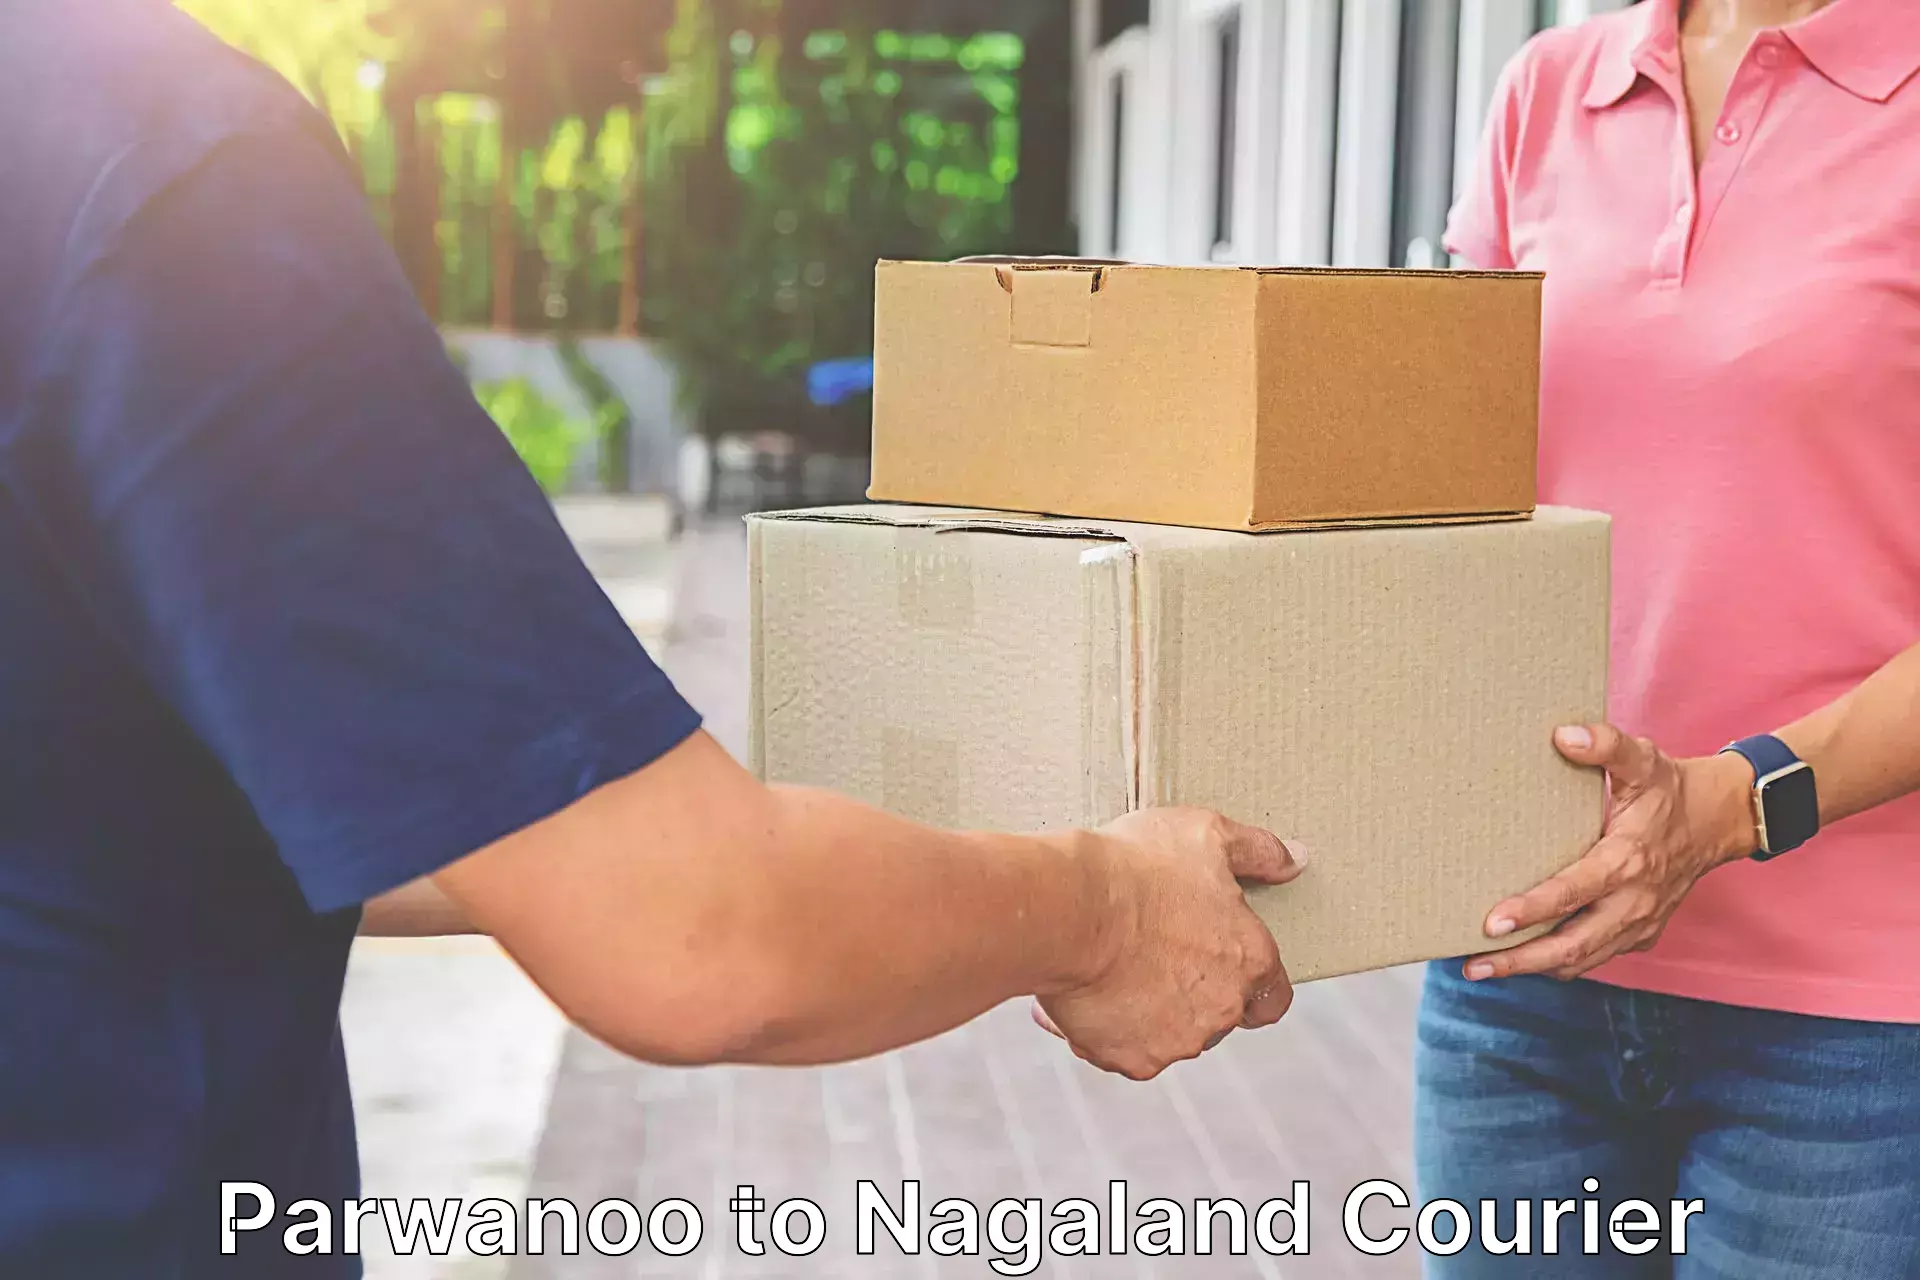 Fast delivery service Parwanoo to NIT Nagaland